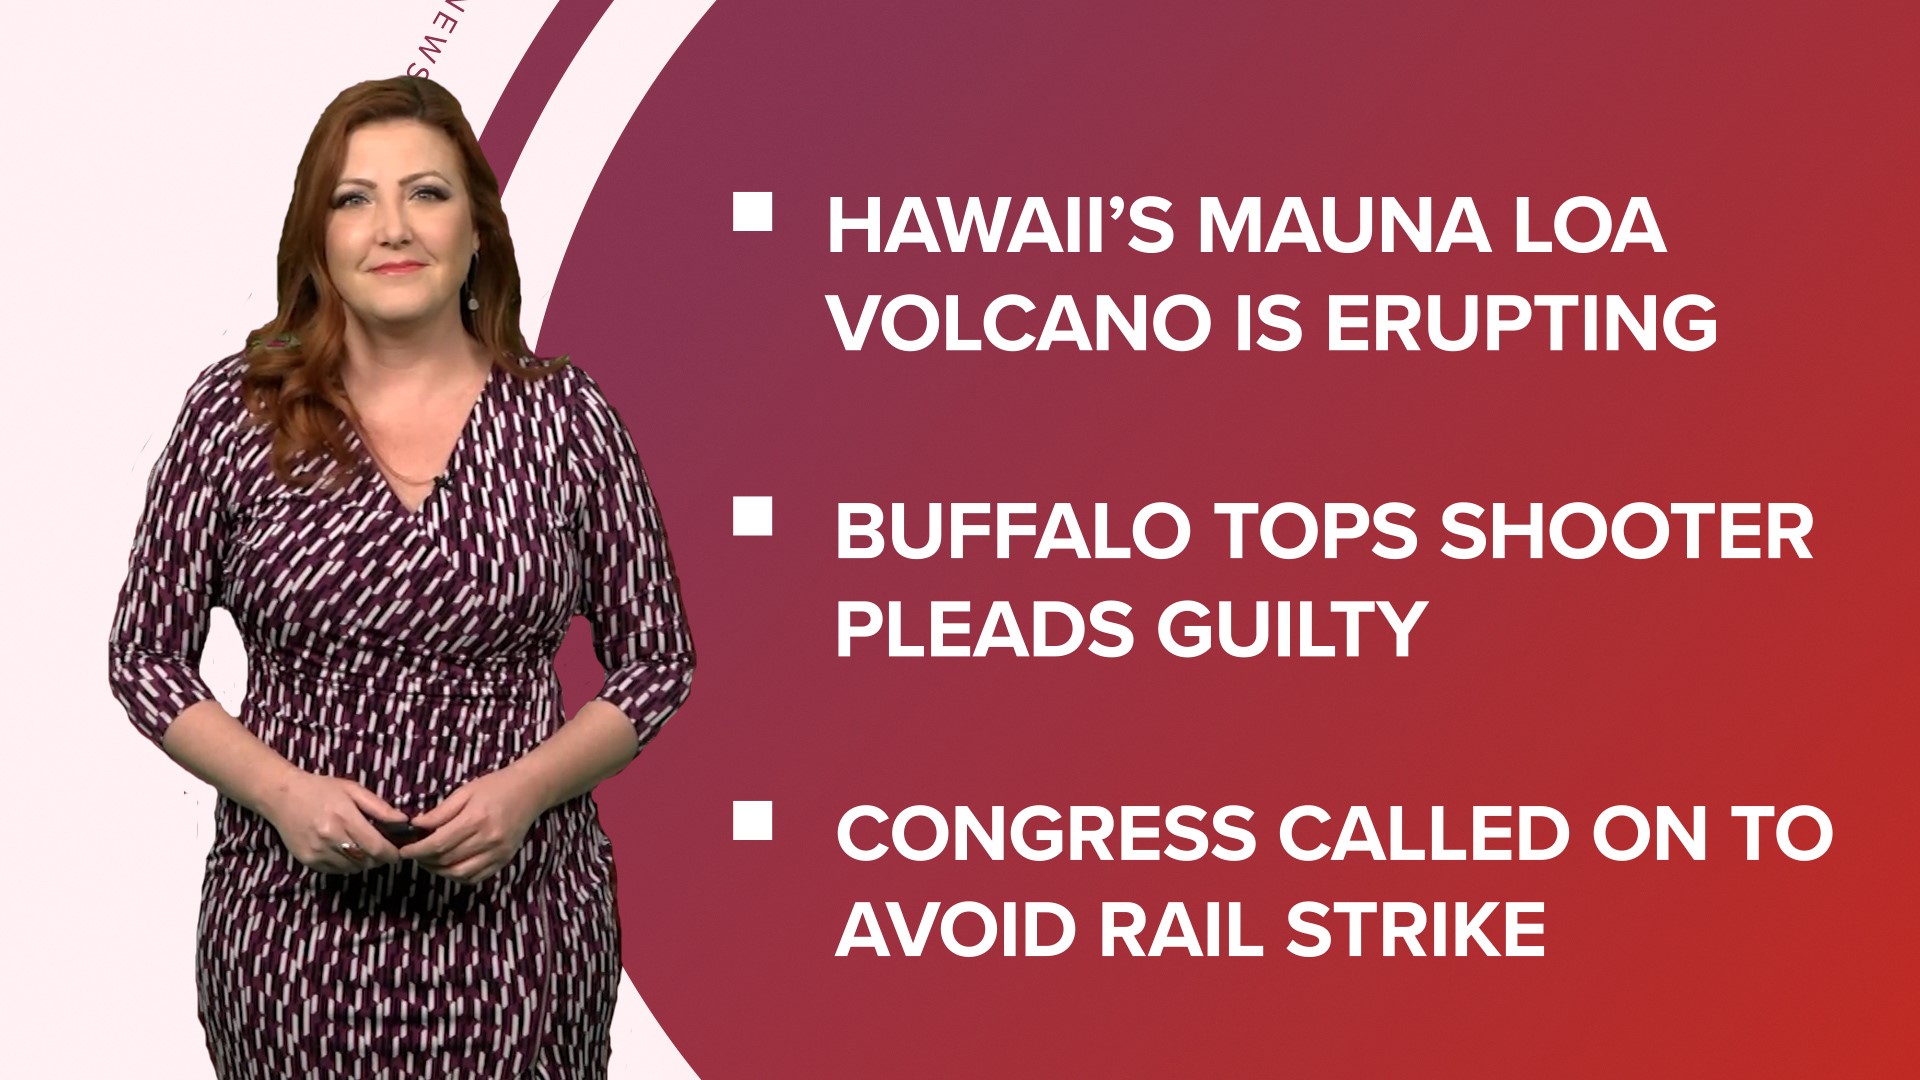 A look at what is happening in the news from a volcano erupting in Hawaii to Giving Tuesday and the White House 2022 Christmas decorations unveiled.